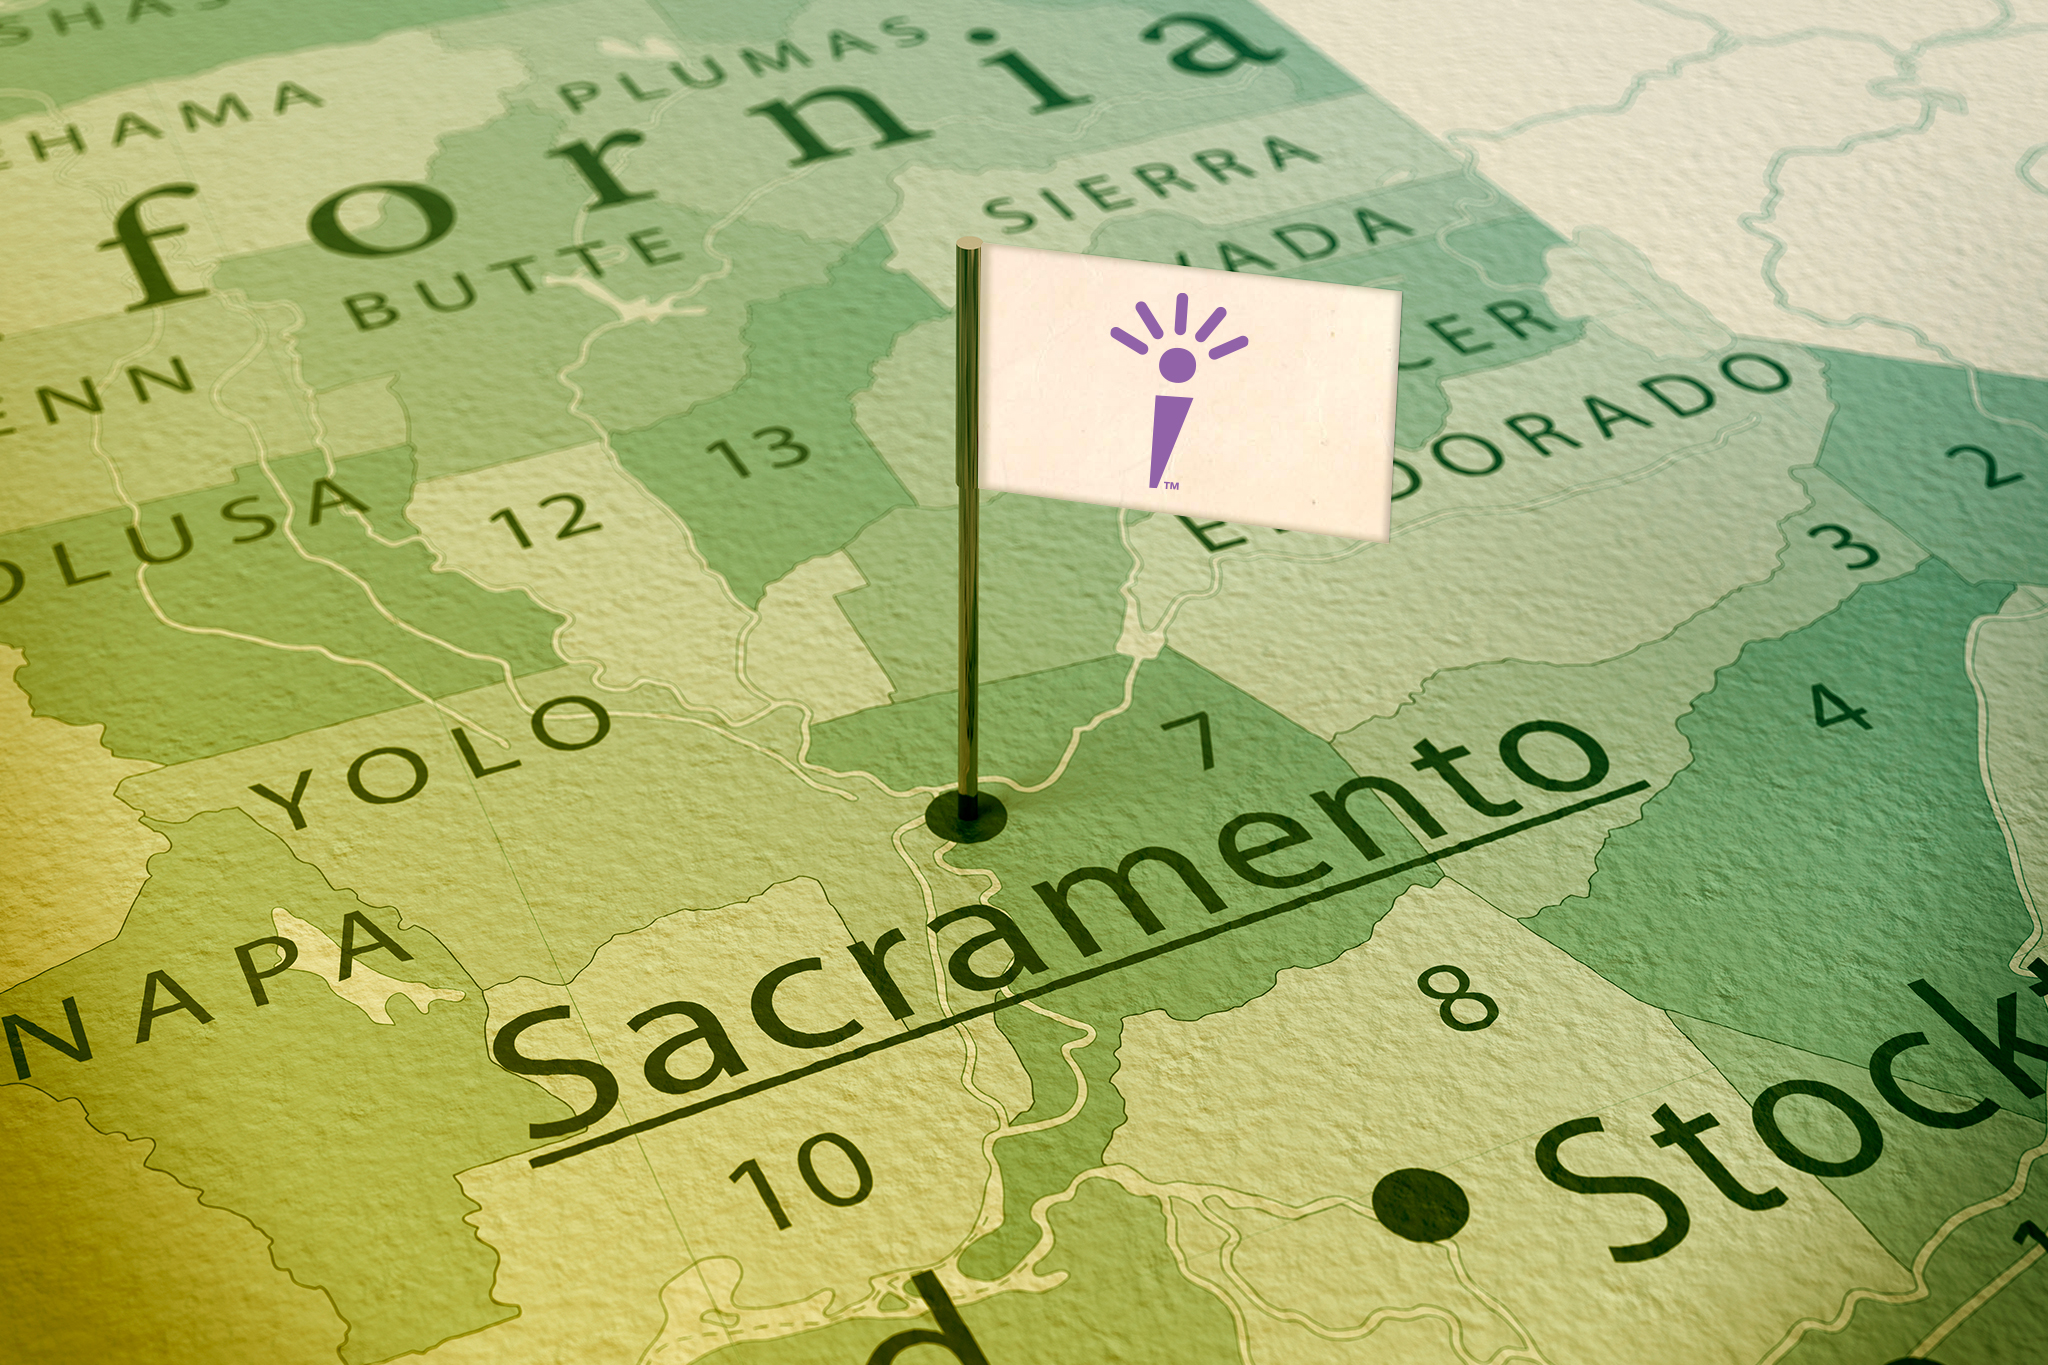 Decisely Expands Small Business Benefits Team and Platform in Northern California